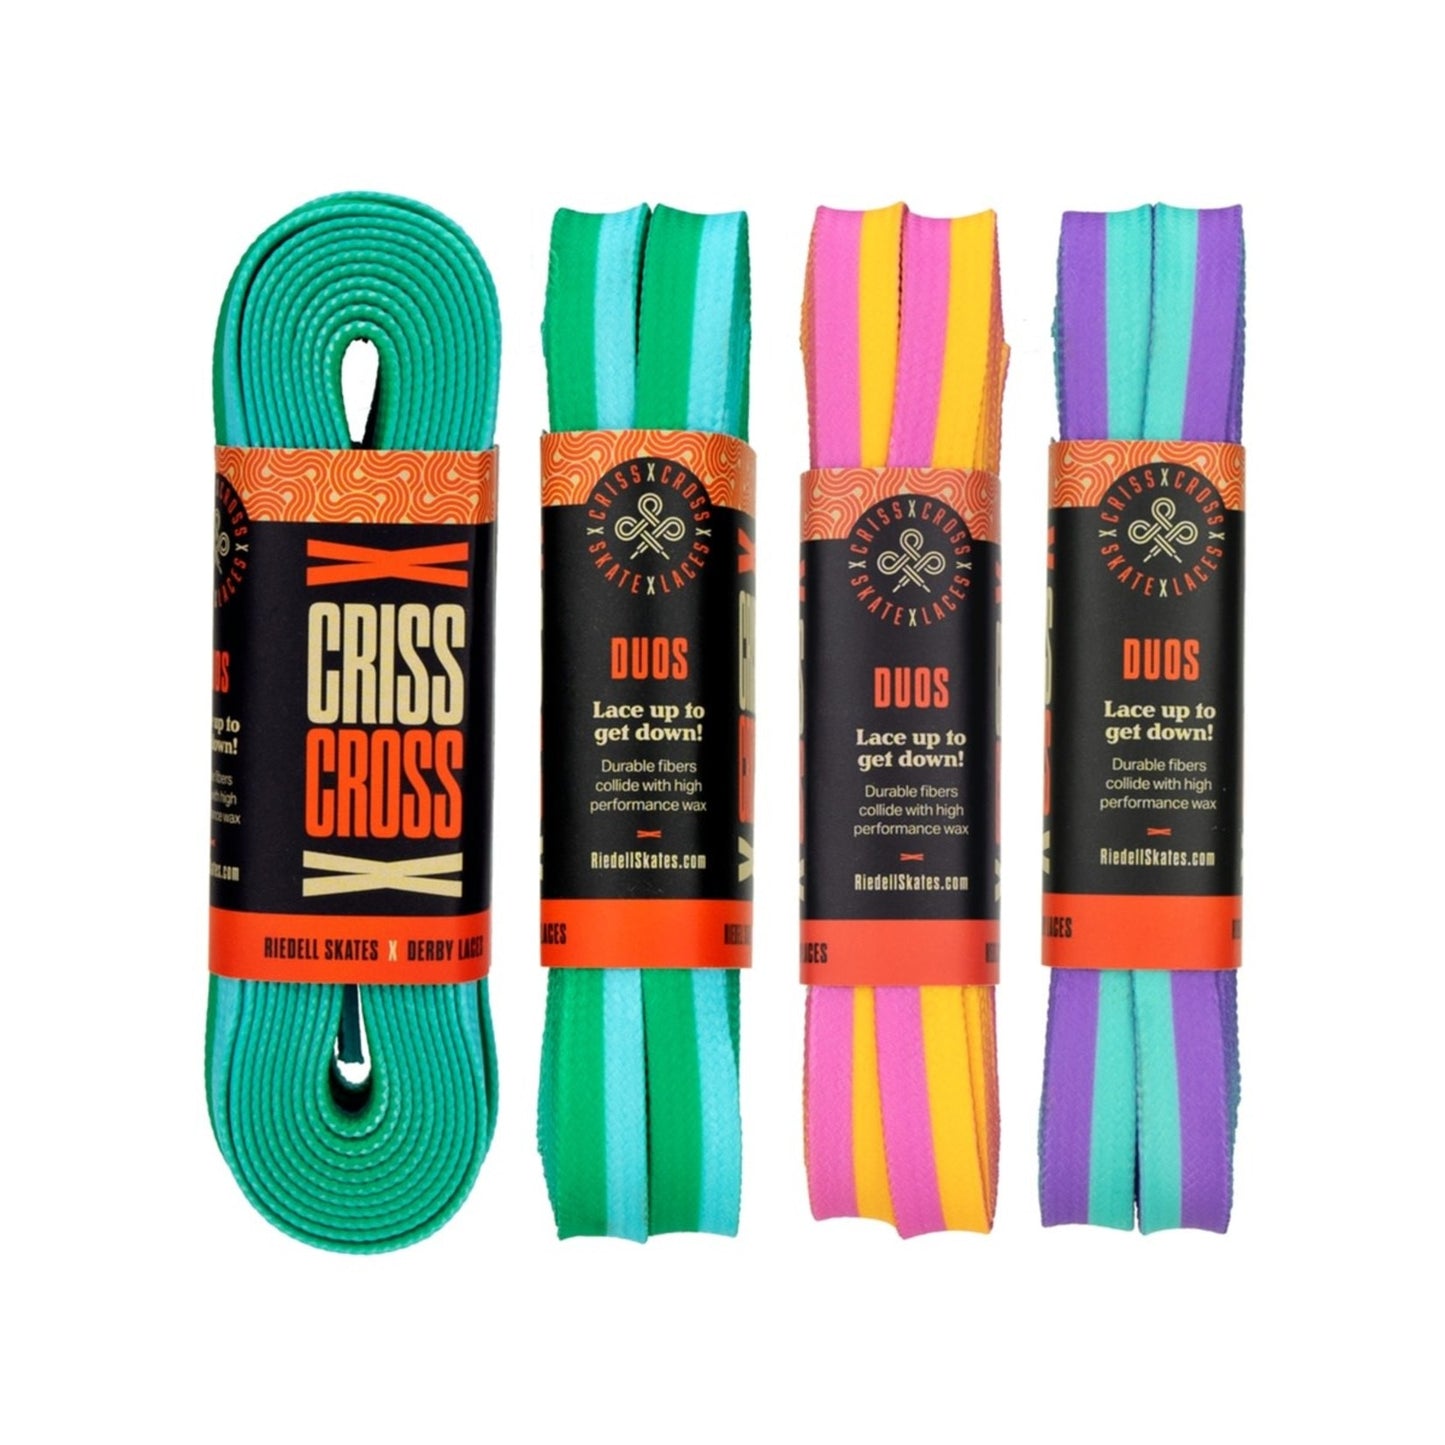 CRISS CROSS DUO LACES